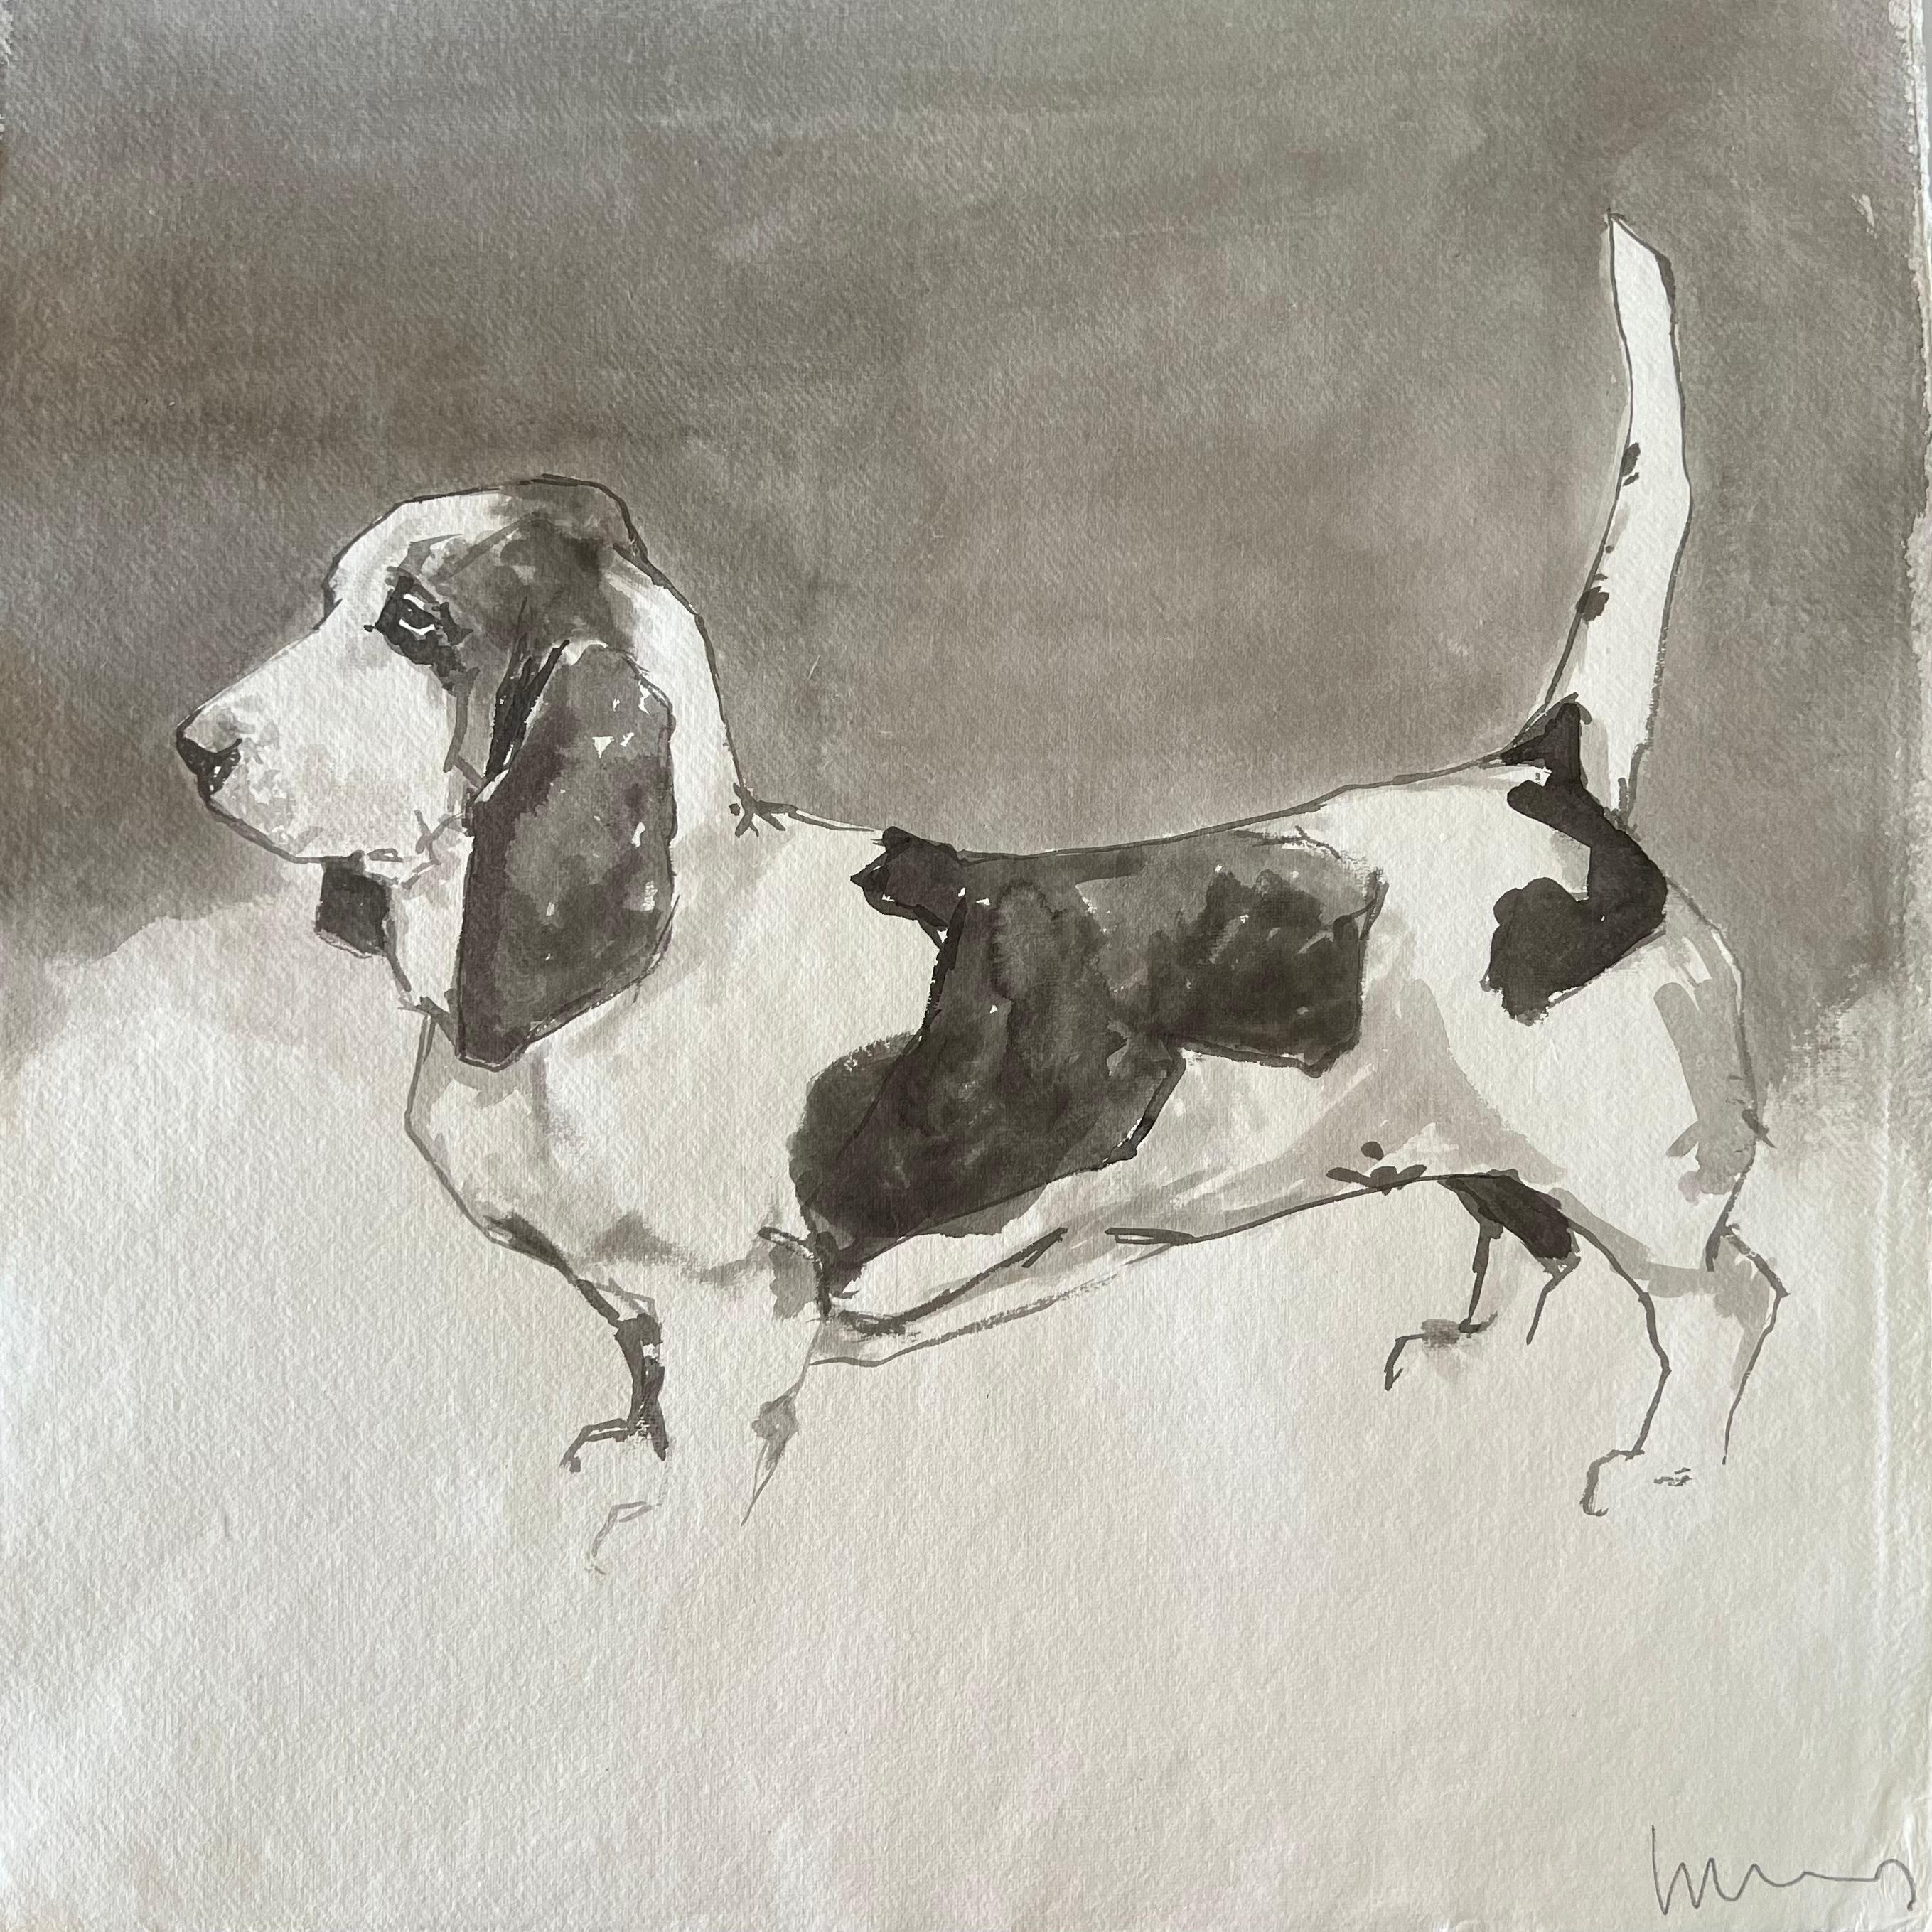 Bassett Hound minimal black and white ink painting on Indian rag paper